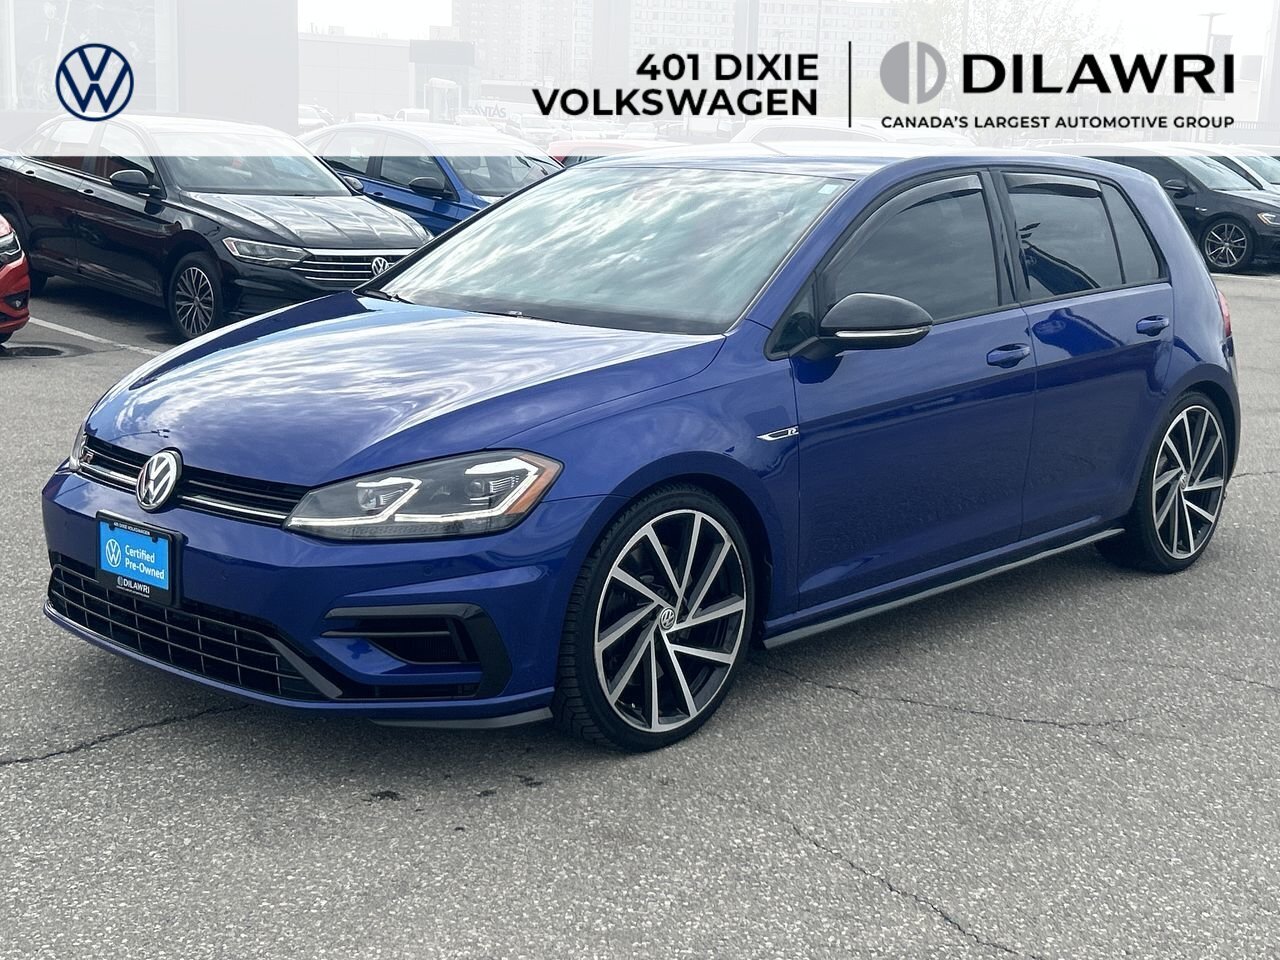 2018 Volkswagen Golf R 5-Dr 2.0T 4MOTION at DSG Clean Carfax| Winter Tire